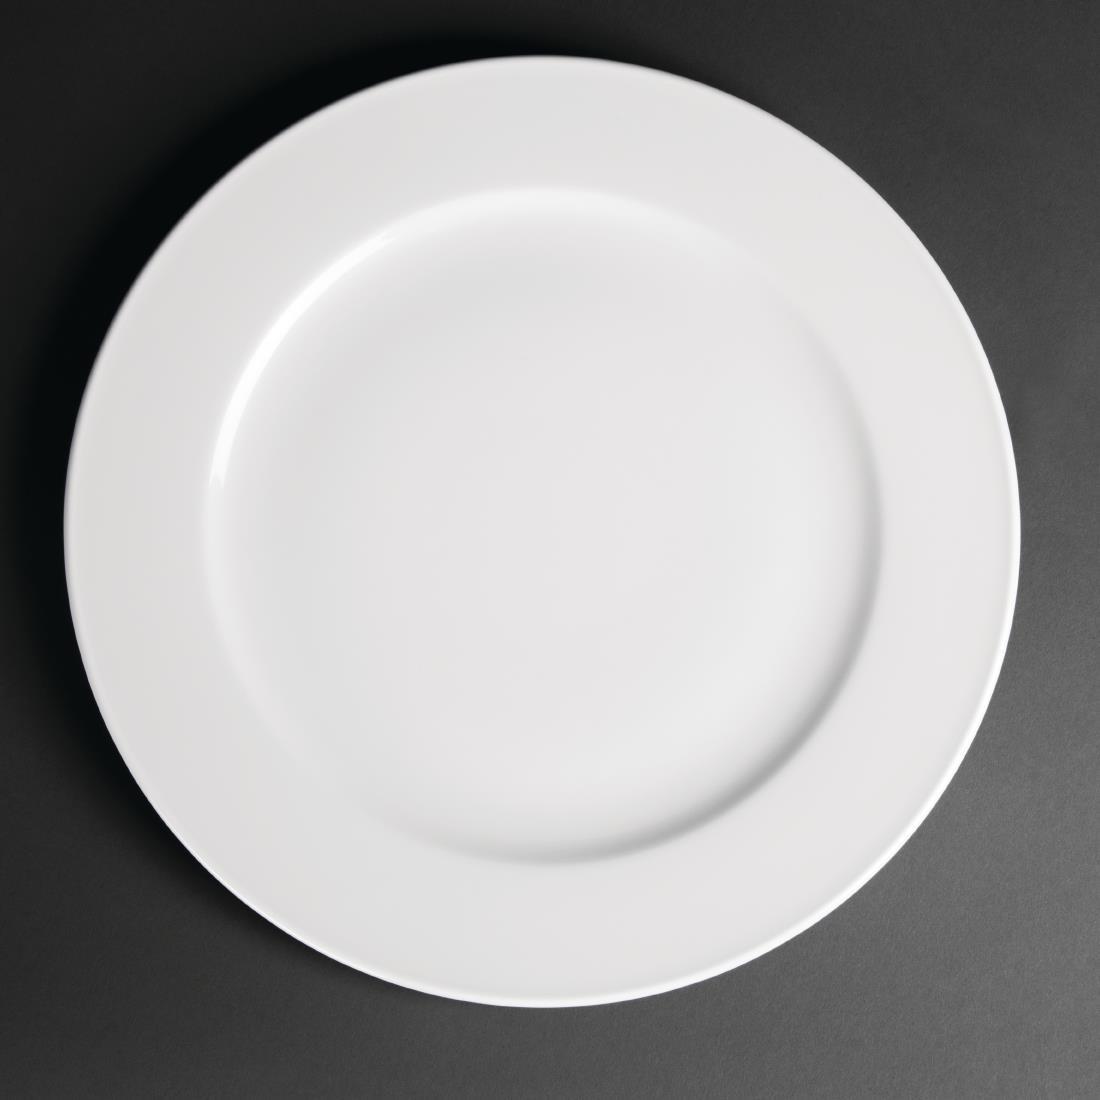 Royal Porcelain Classic White Wide Rim Plates 310mm (Pack of 12) - CG011  - 1